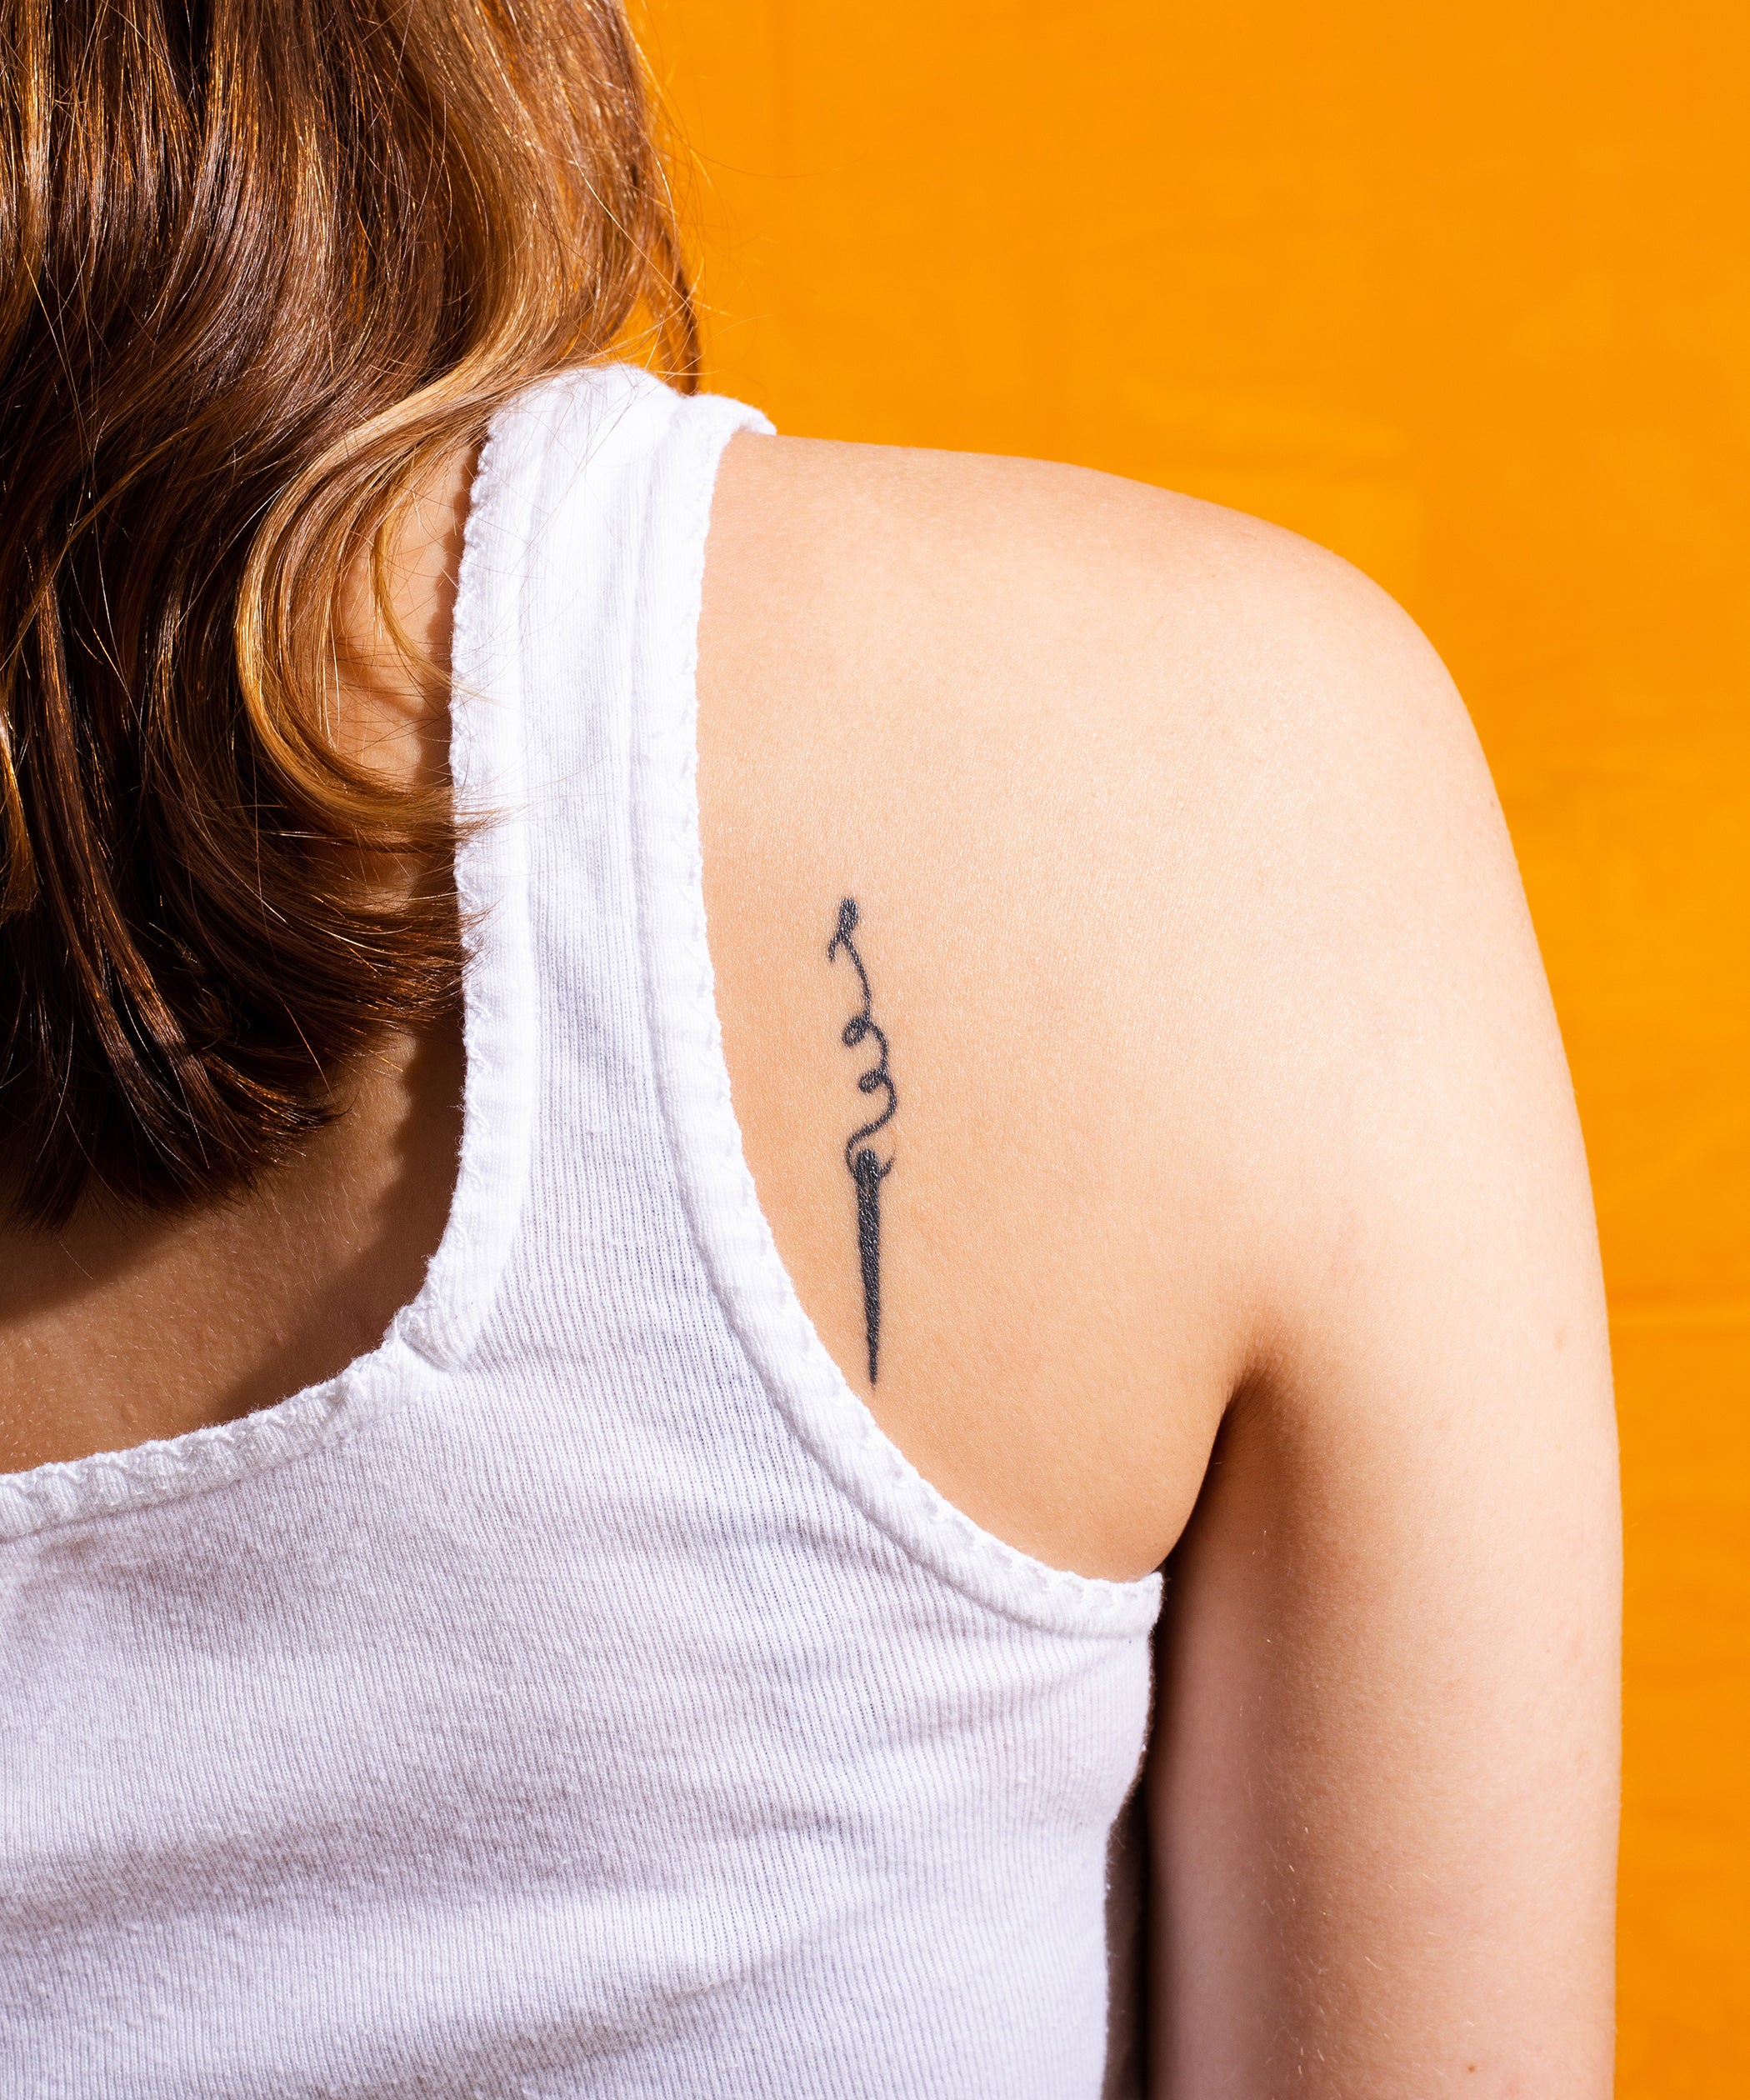 19 minimalist tattoos that will make you want to book an appointment now   Mashable